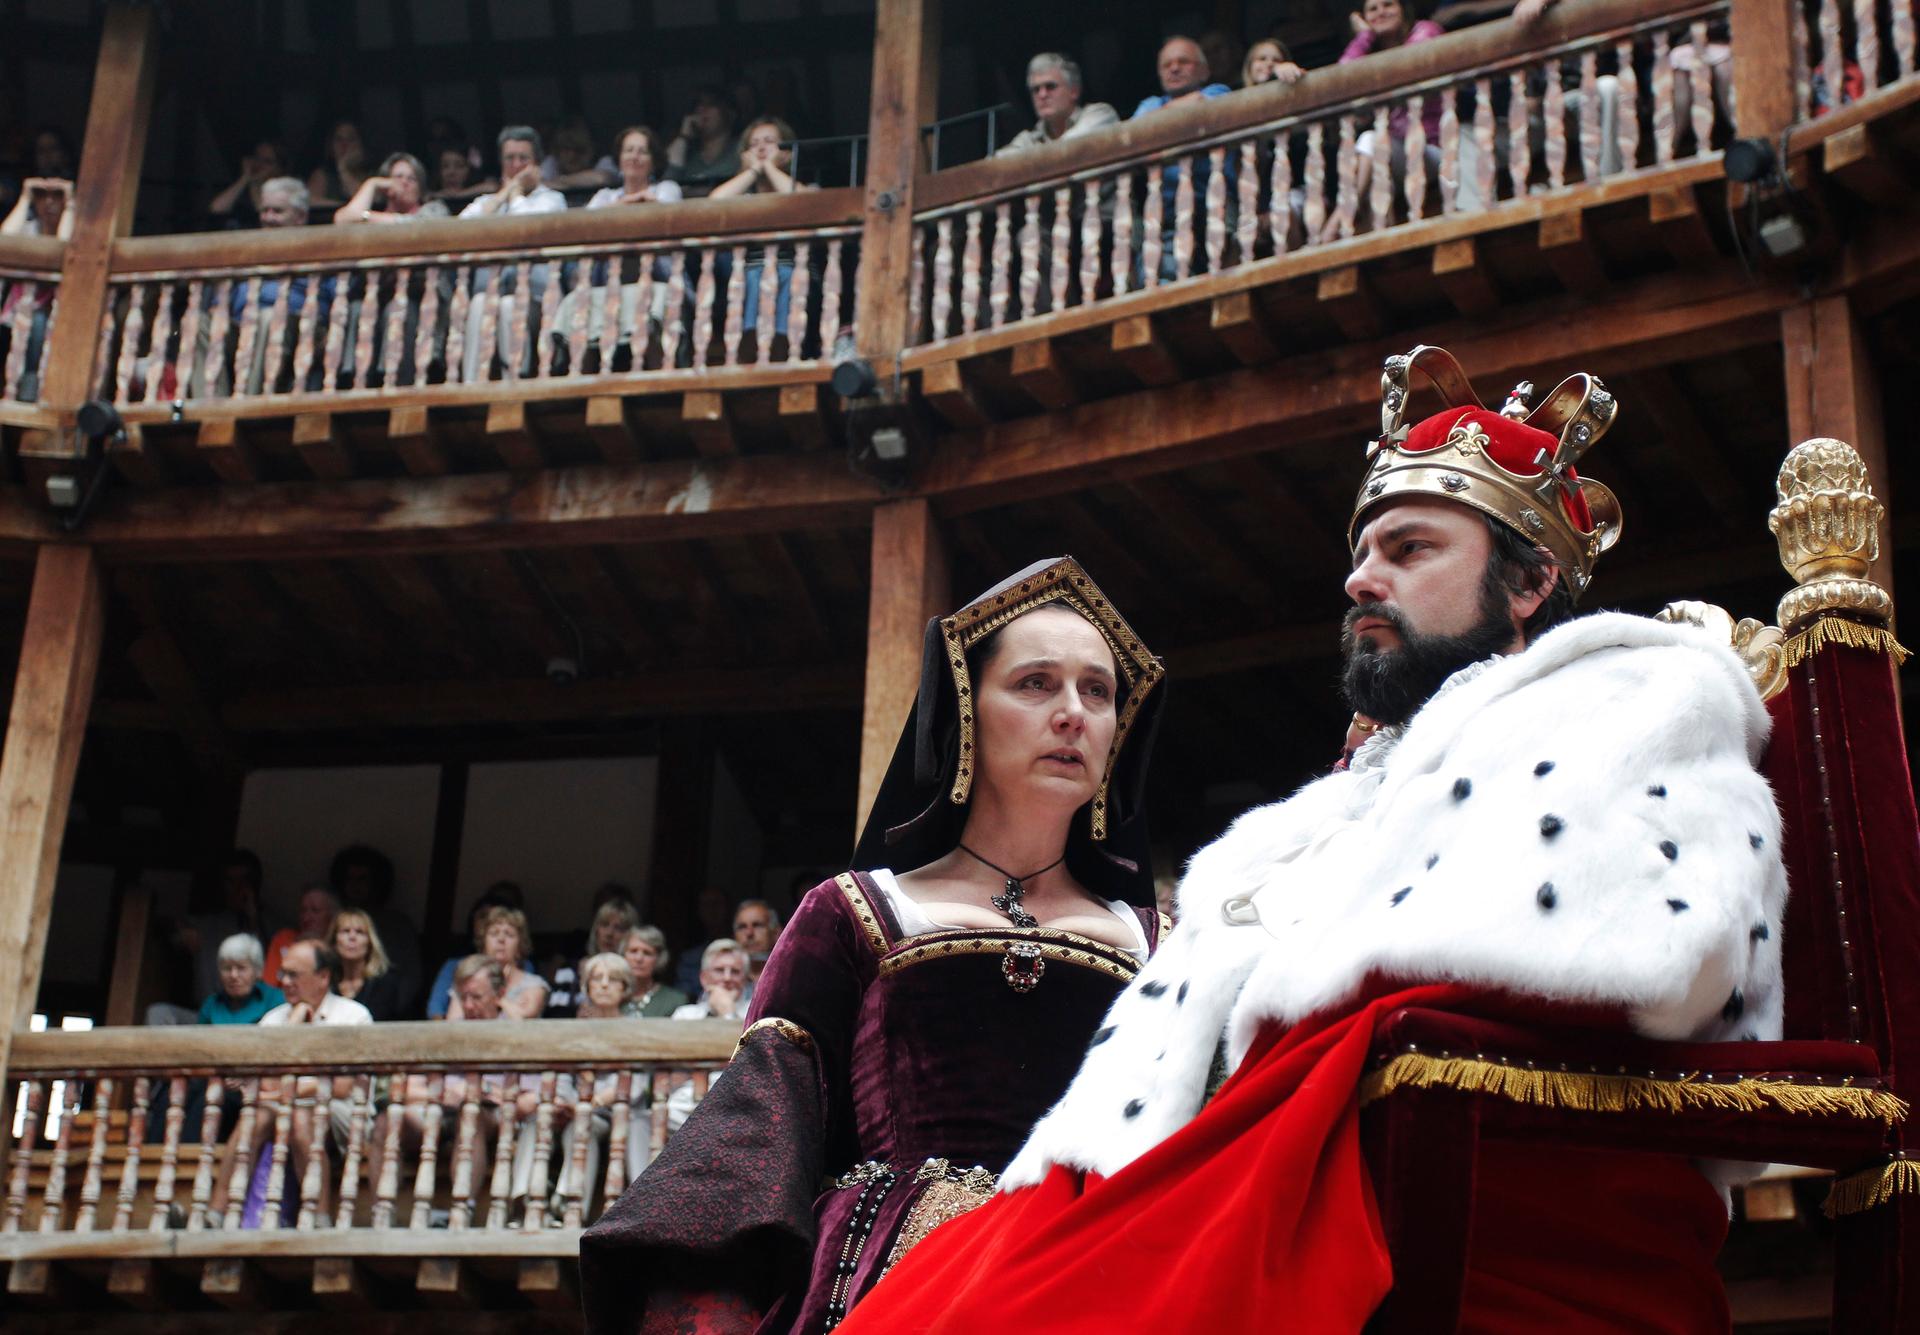 Actors Dominic Rowan (R) and Kate Duchene perform as Henry VIII and Queen Katherine in Shakespeare's Henry VIII at the Globe theatre in London July 6, 2010.